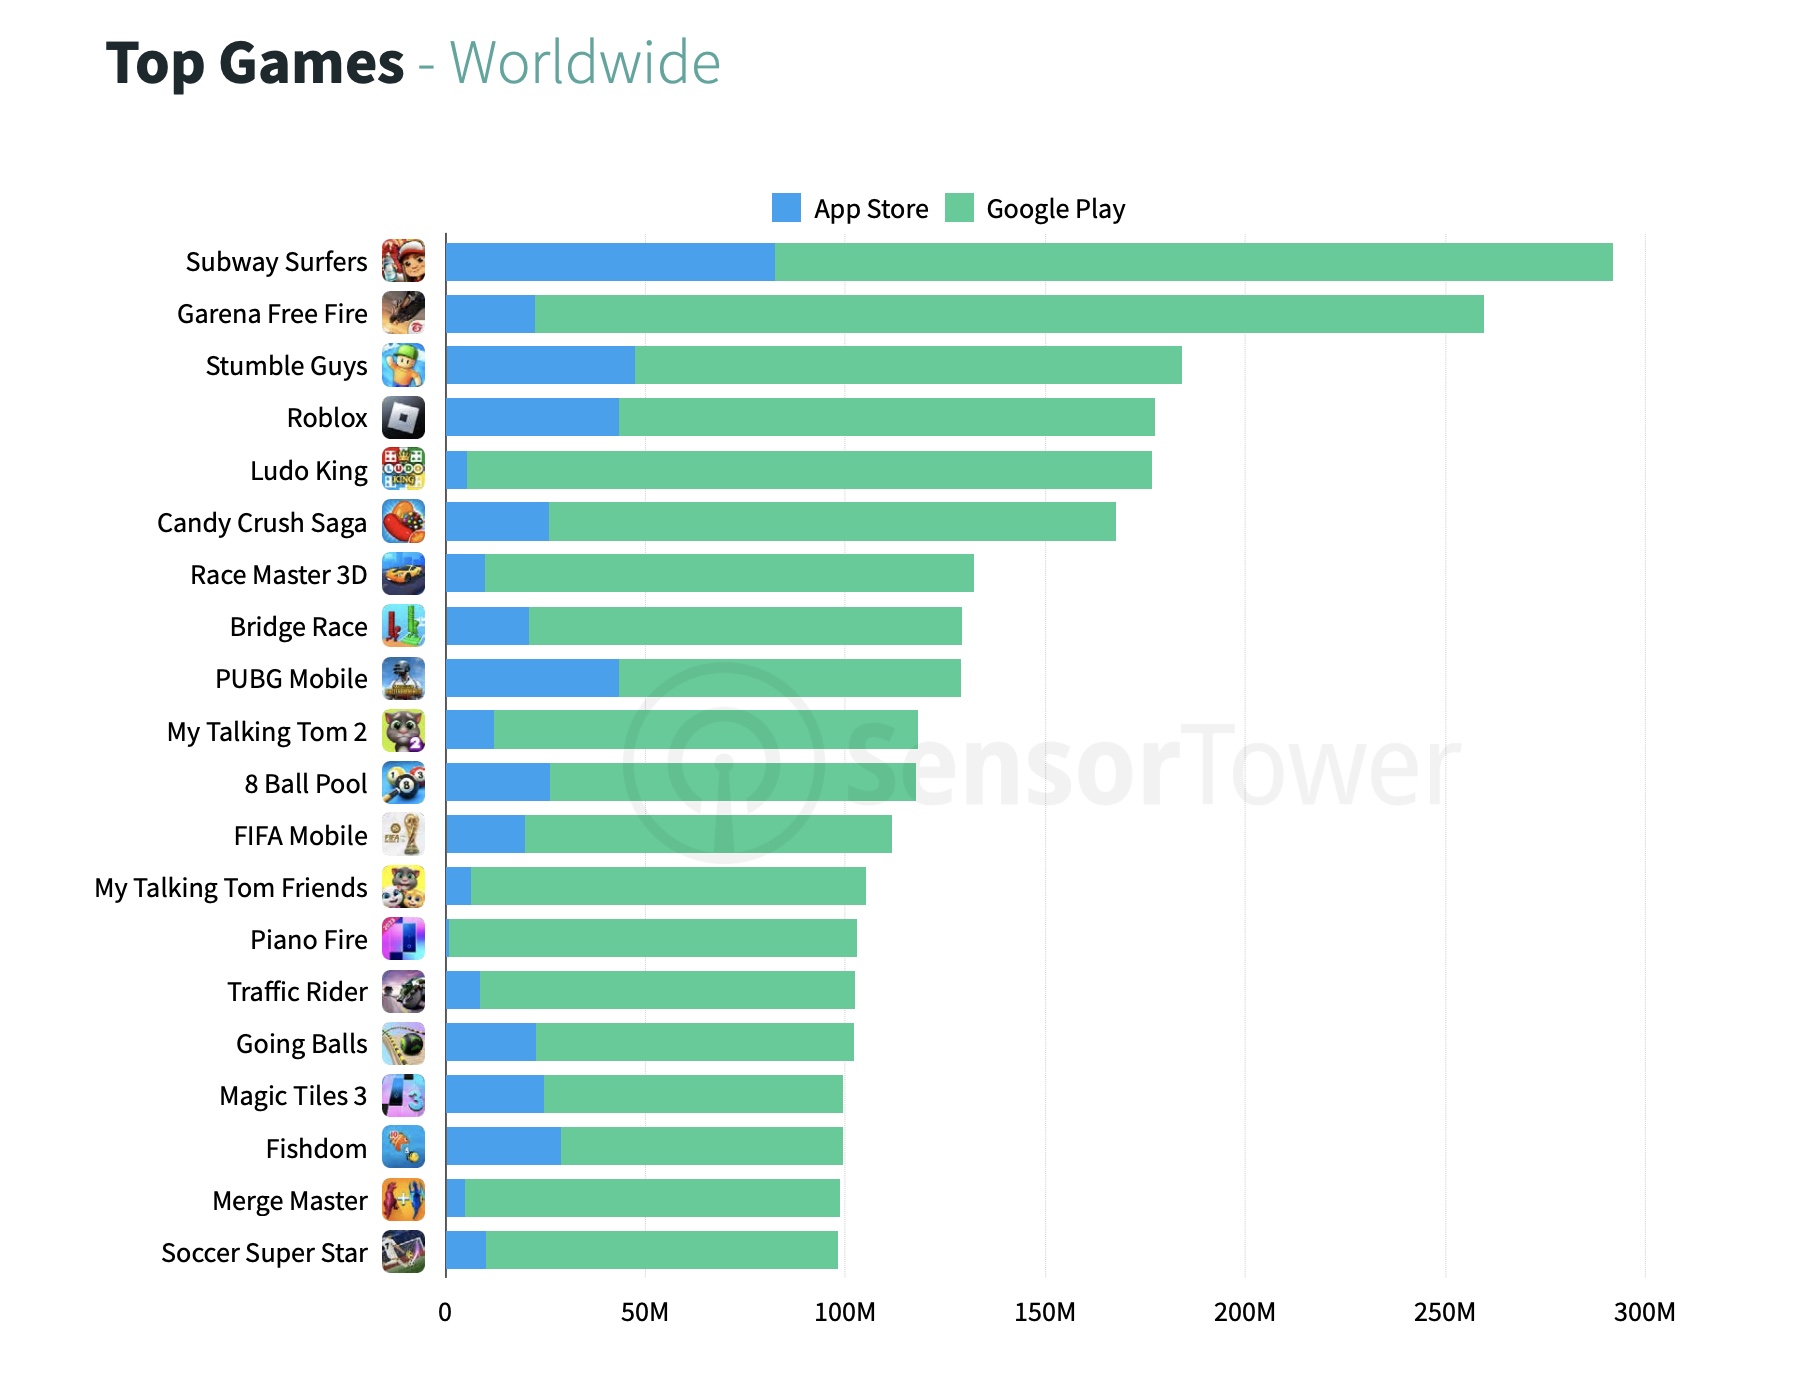 Subway Surfers Was the Top-Downloaded Game in Q4 2022